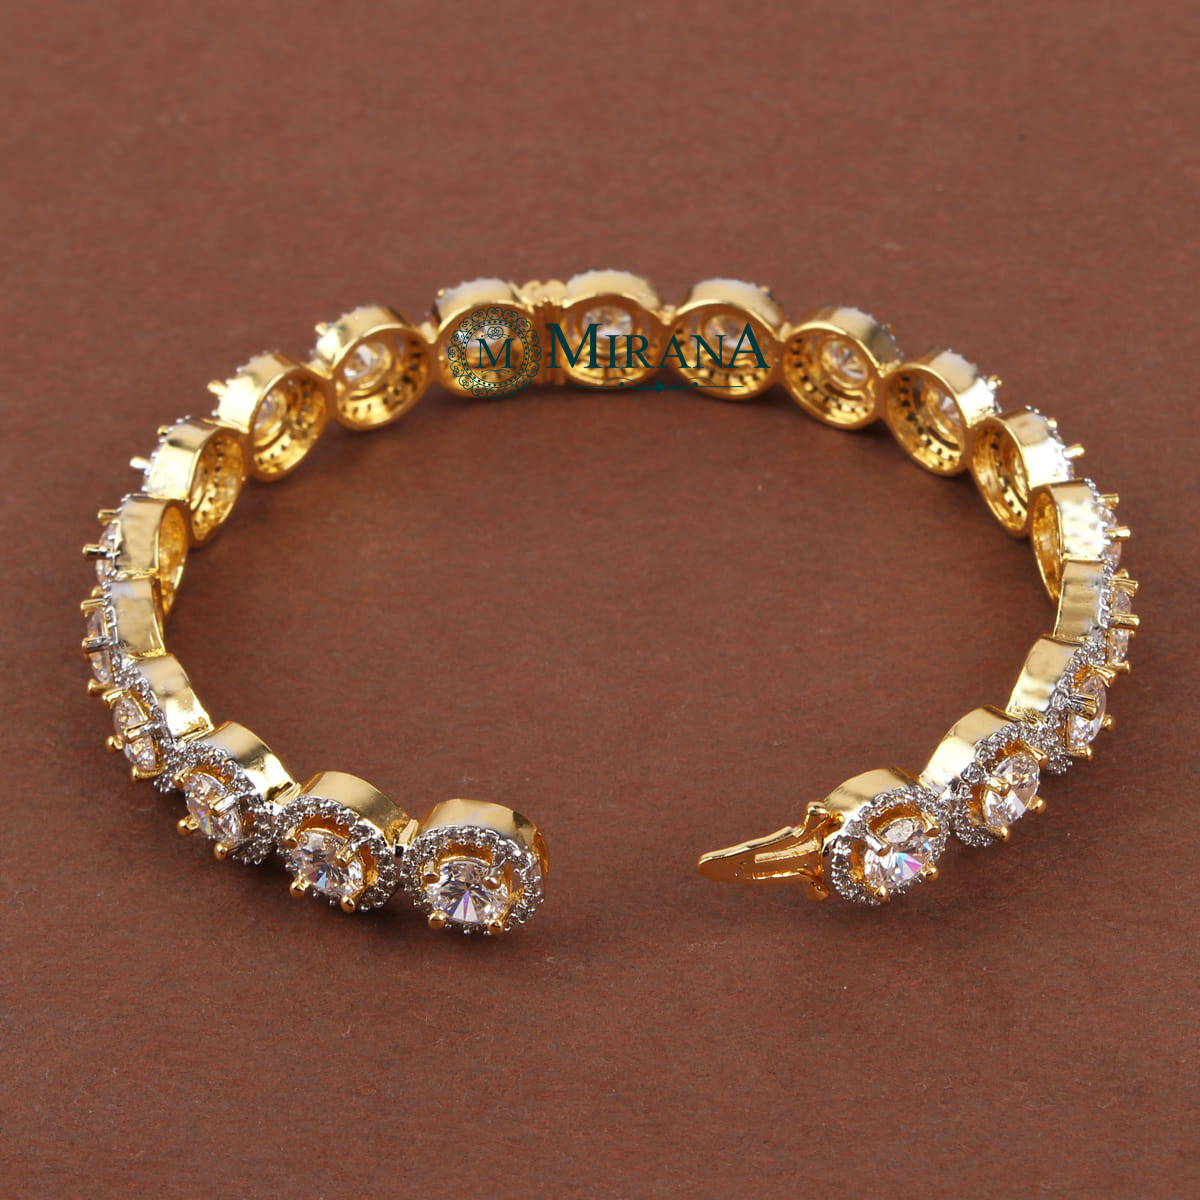 Certified Natural Golden pyrite stone Bracelet for Women and Men Gold  Pyrite Stone ,8 mm Charm